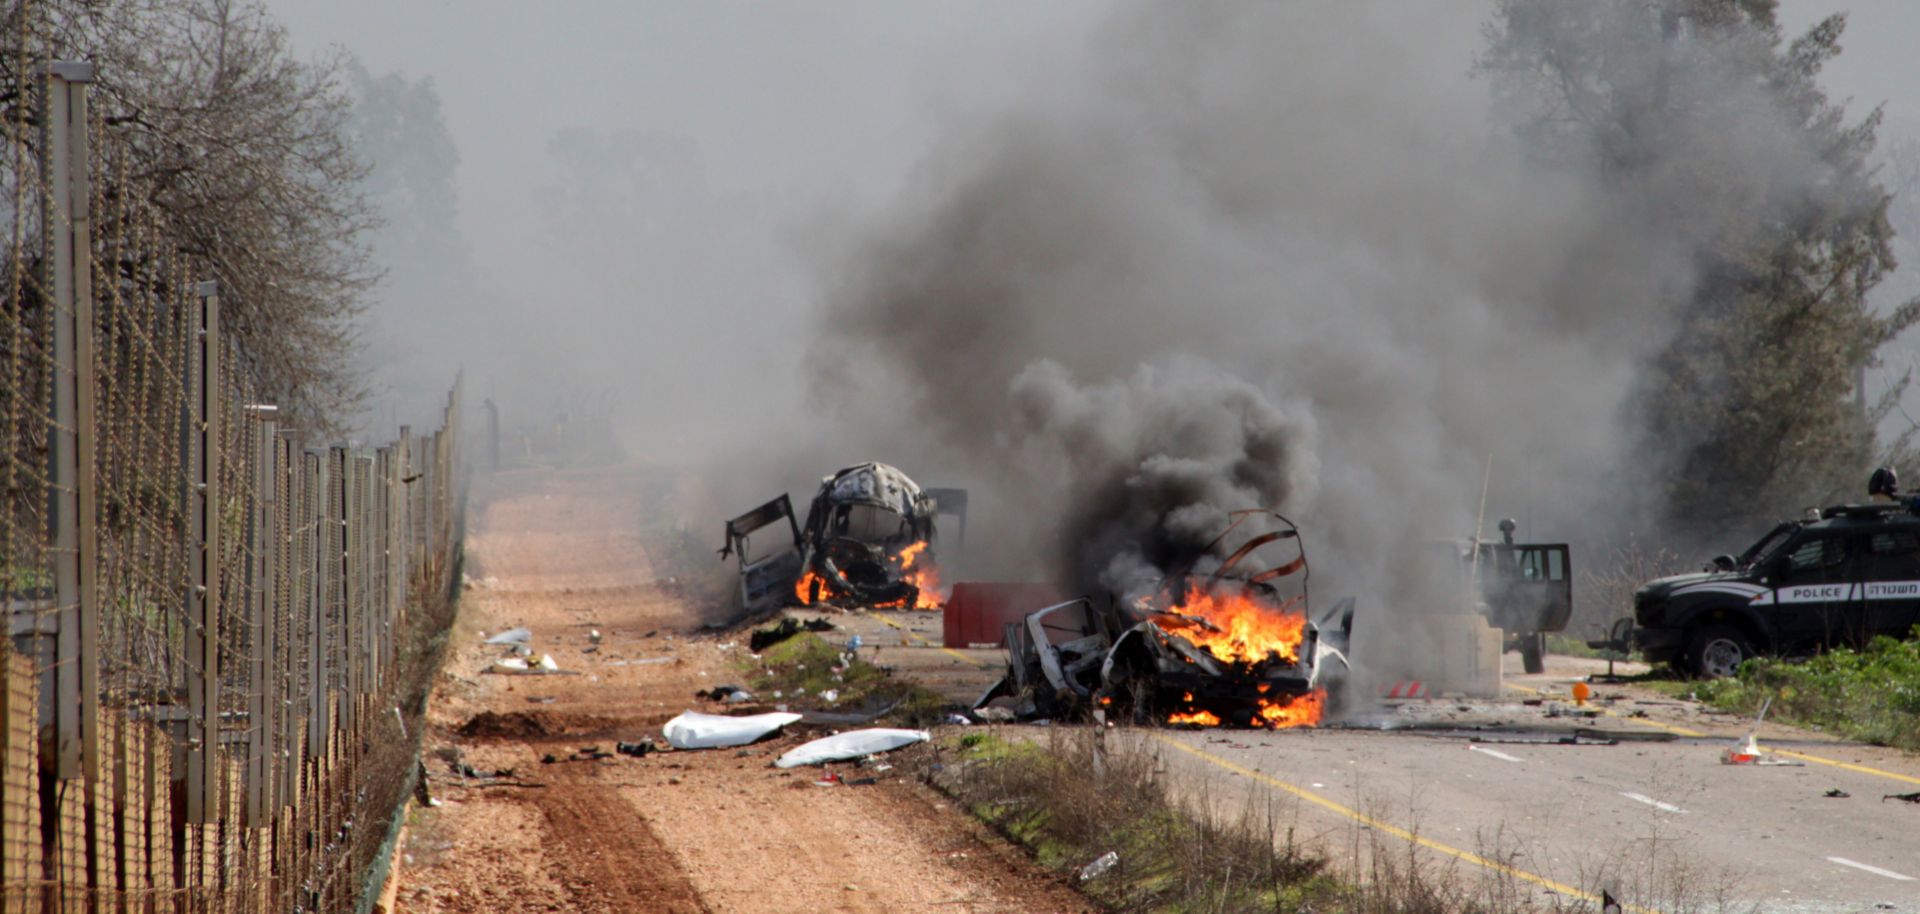 Israeli military vehicles burn after a Hezbollah missile attack in the disputed Shebaa Farms area of southern Lebanon on Jan. 28, 2015. The attack killed two Israeli soldiers and prompted an Israeli military response.